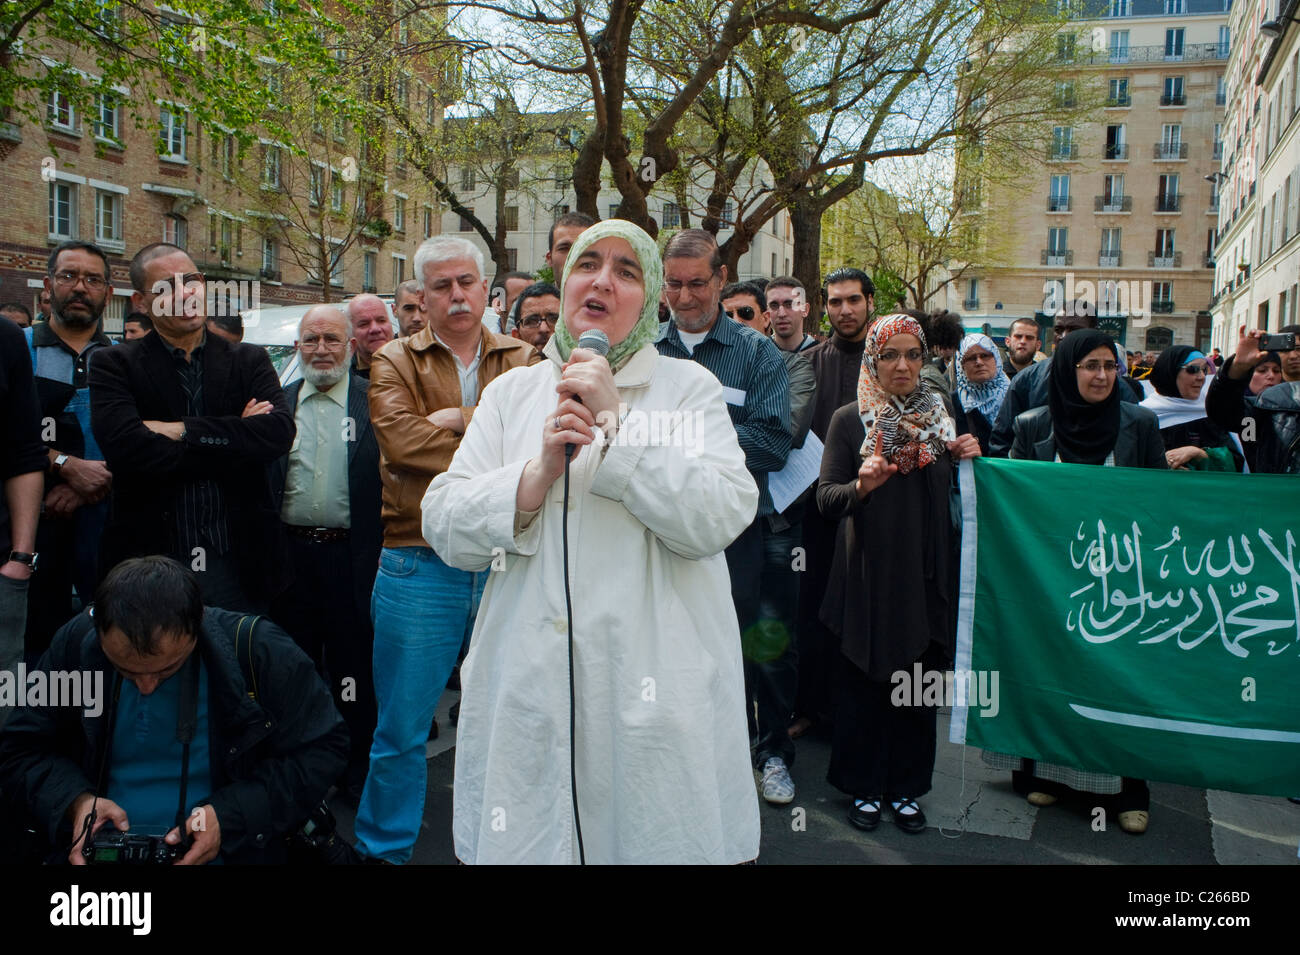 Paris, France, Muslim Woman in Hajib, Demonstrating Against Islamophobia, Talking to Crowd on Street with Microphone, Protests, religious meeting, different cultures, politics religion Stock Photo